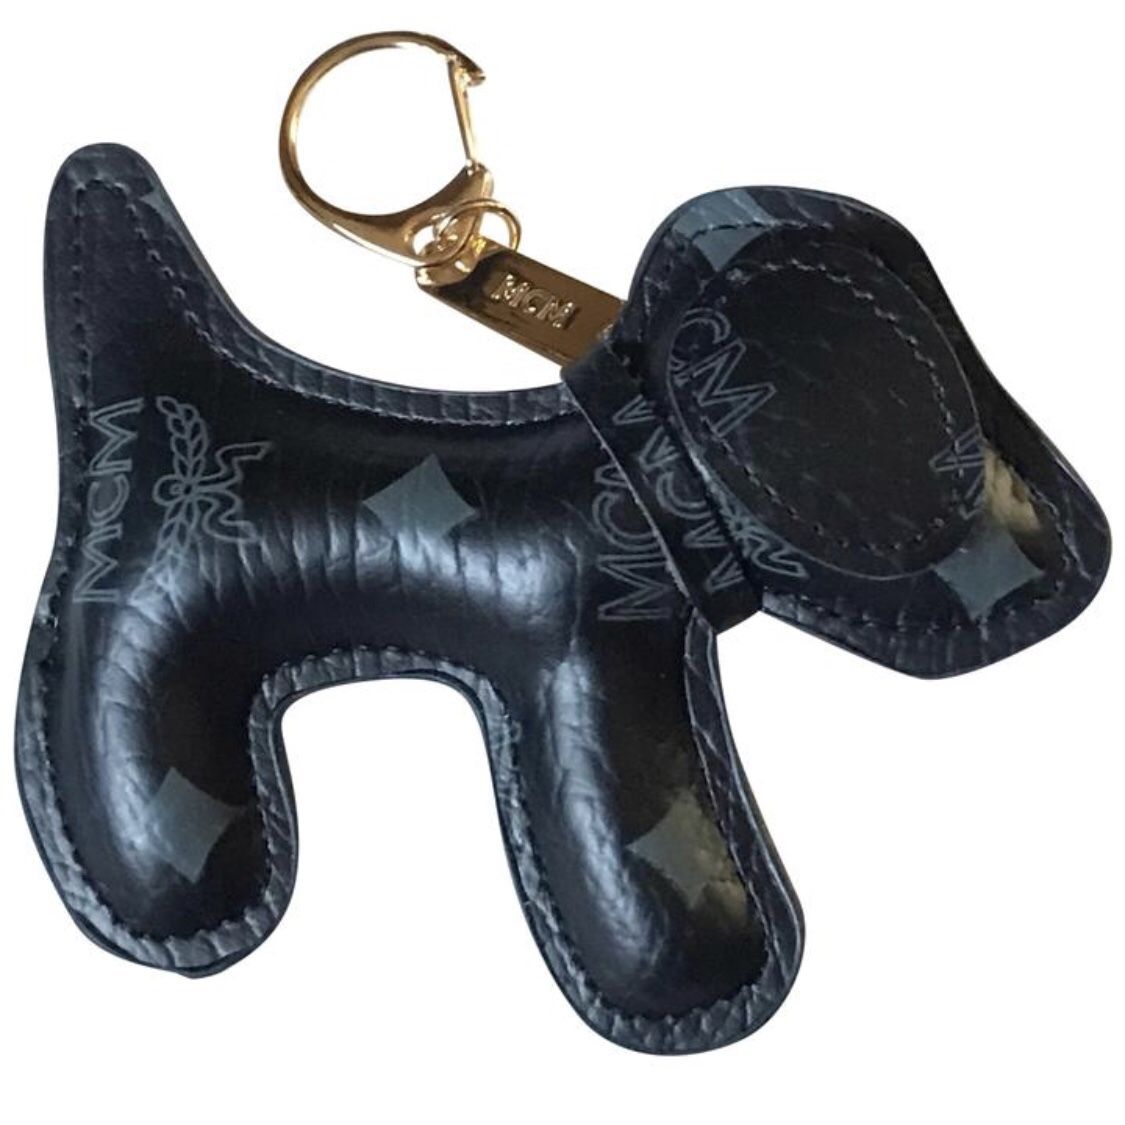 Dog Key Chains for sale